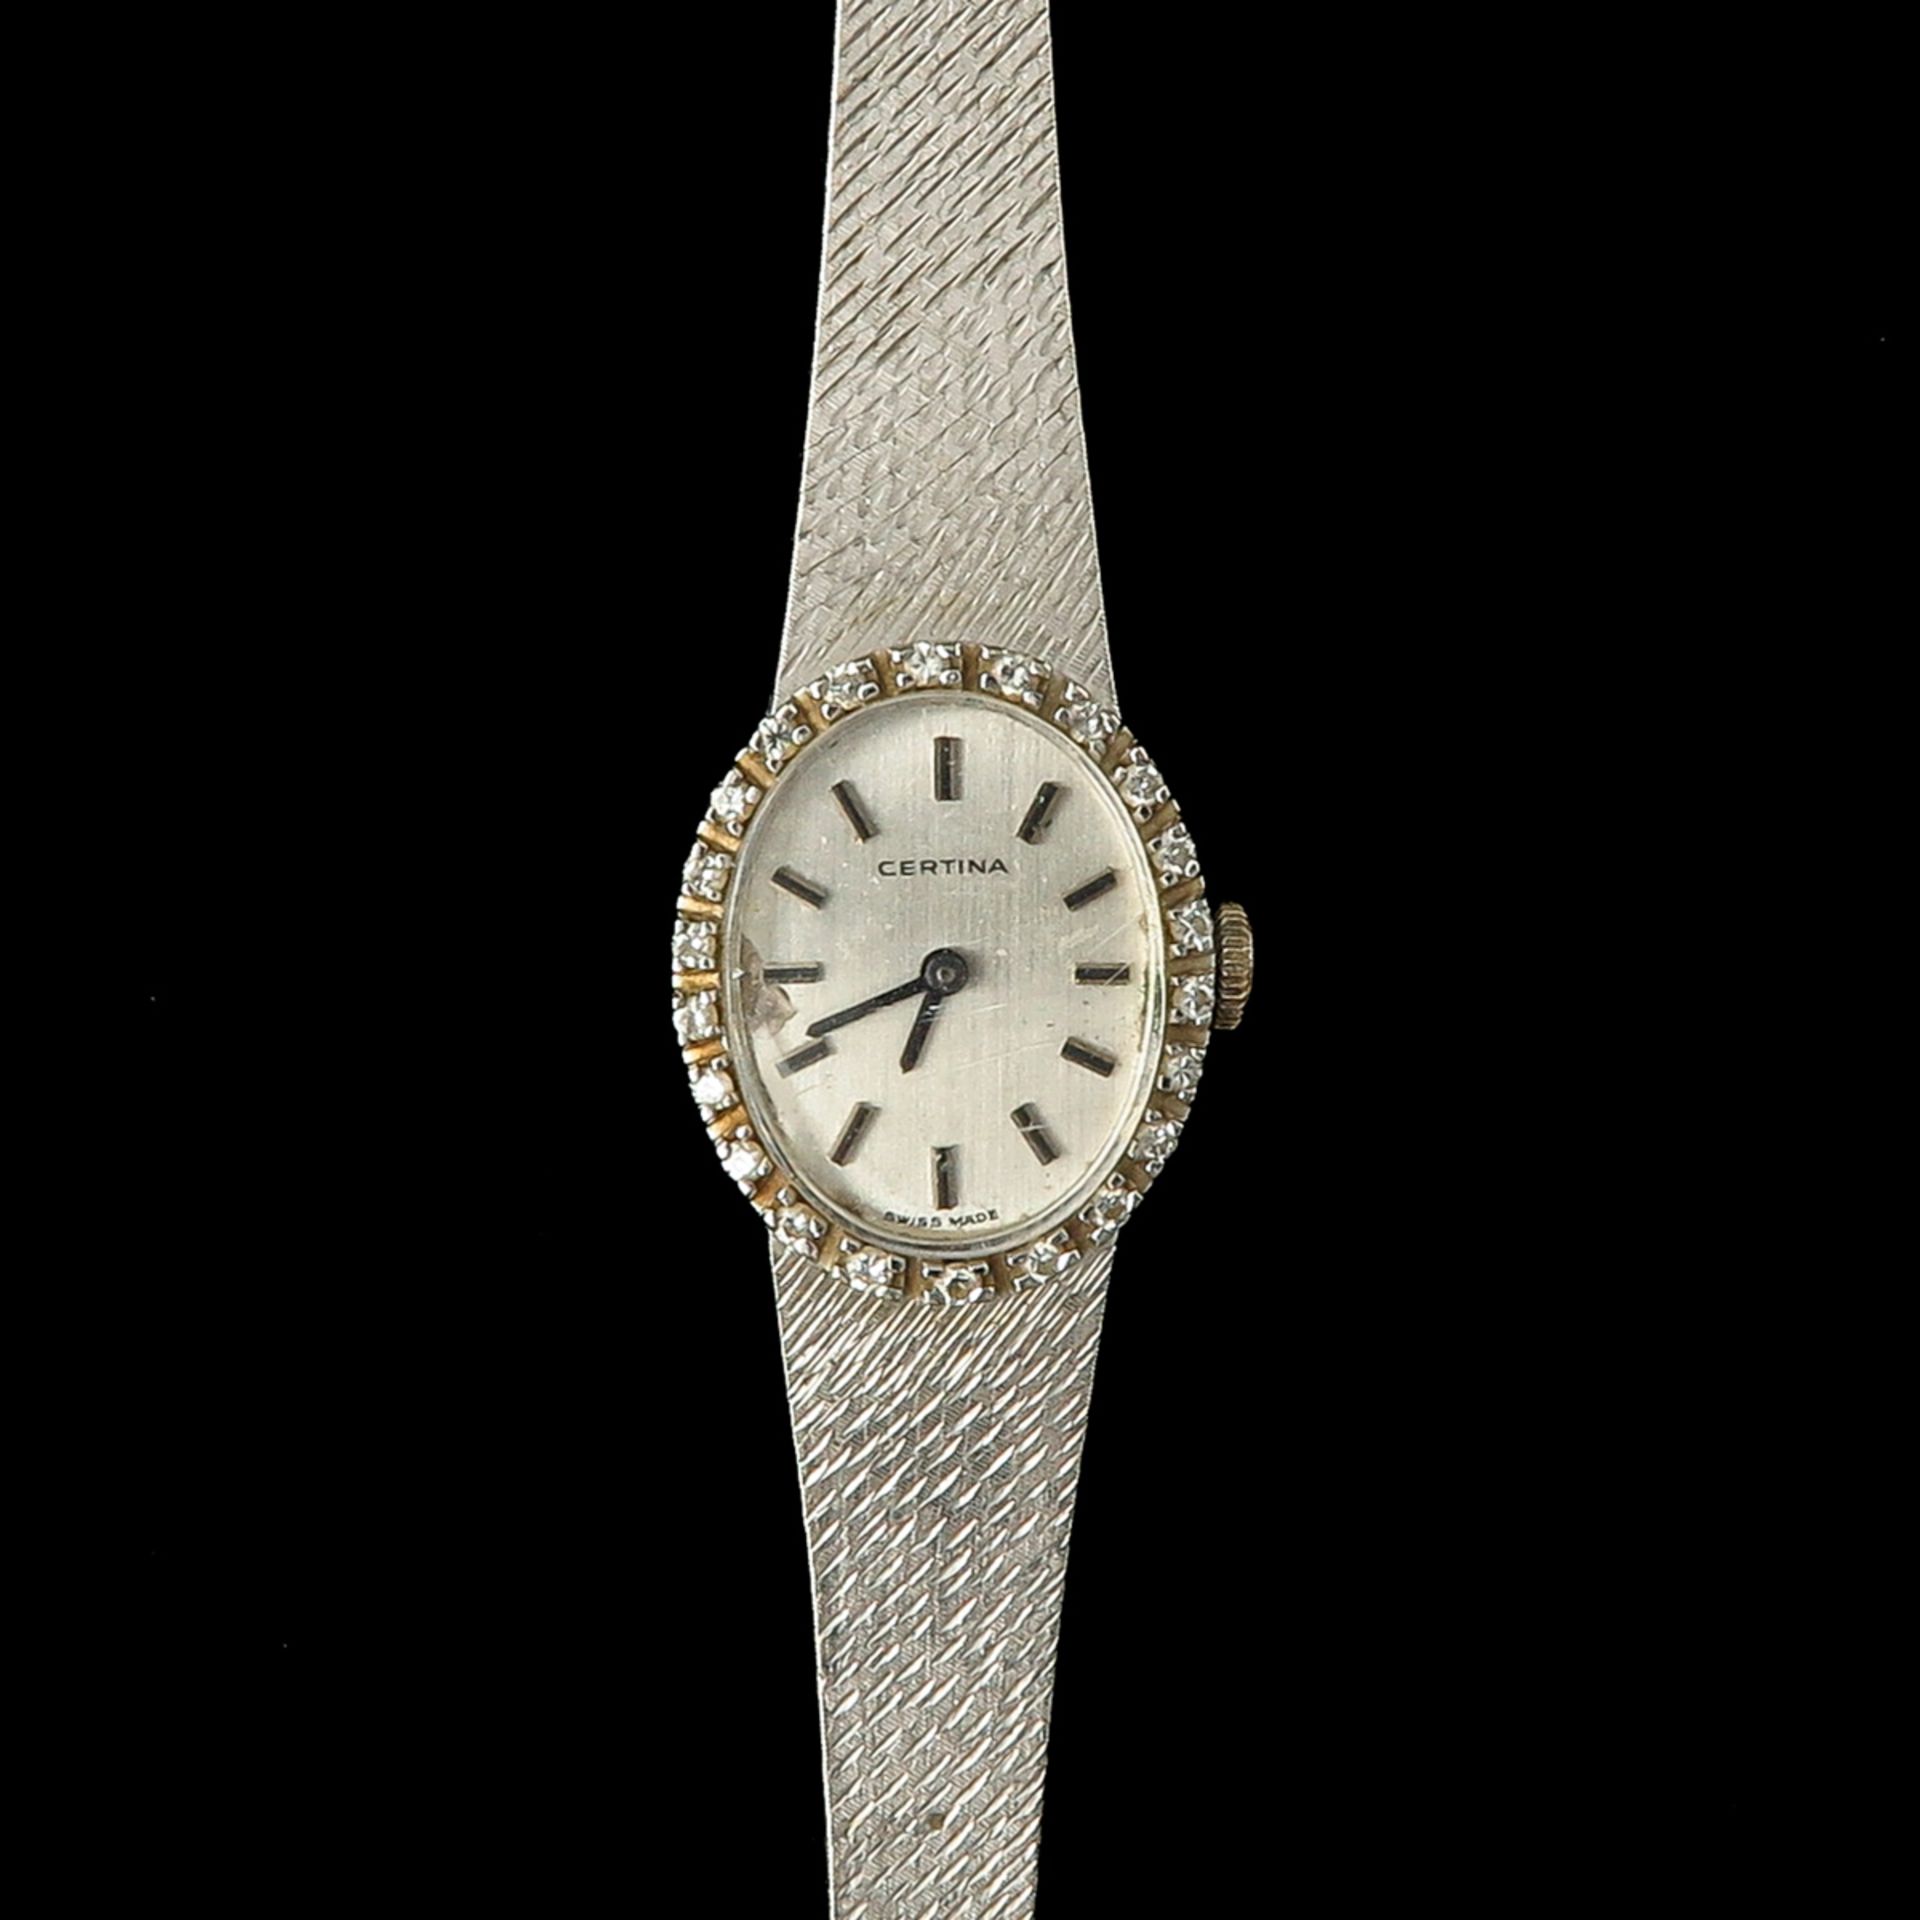 A Ladies Certina Watch - Image 3 of 7